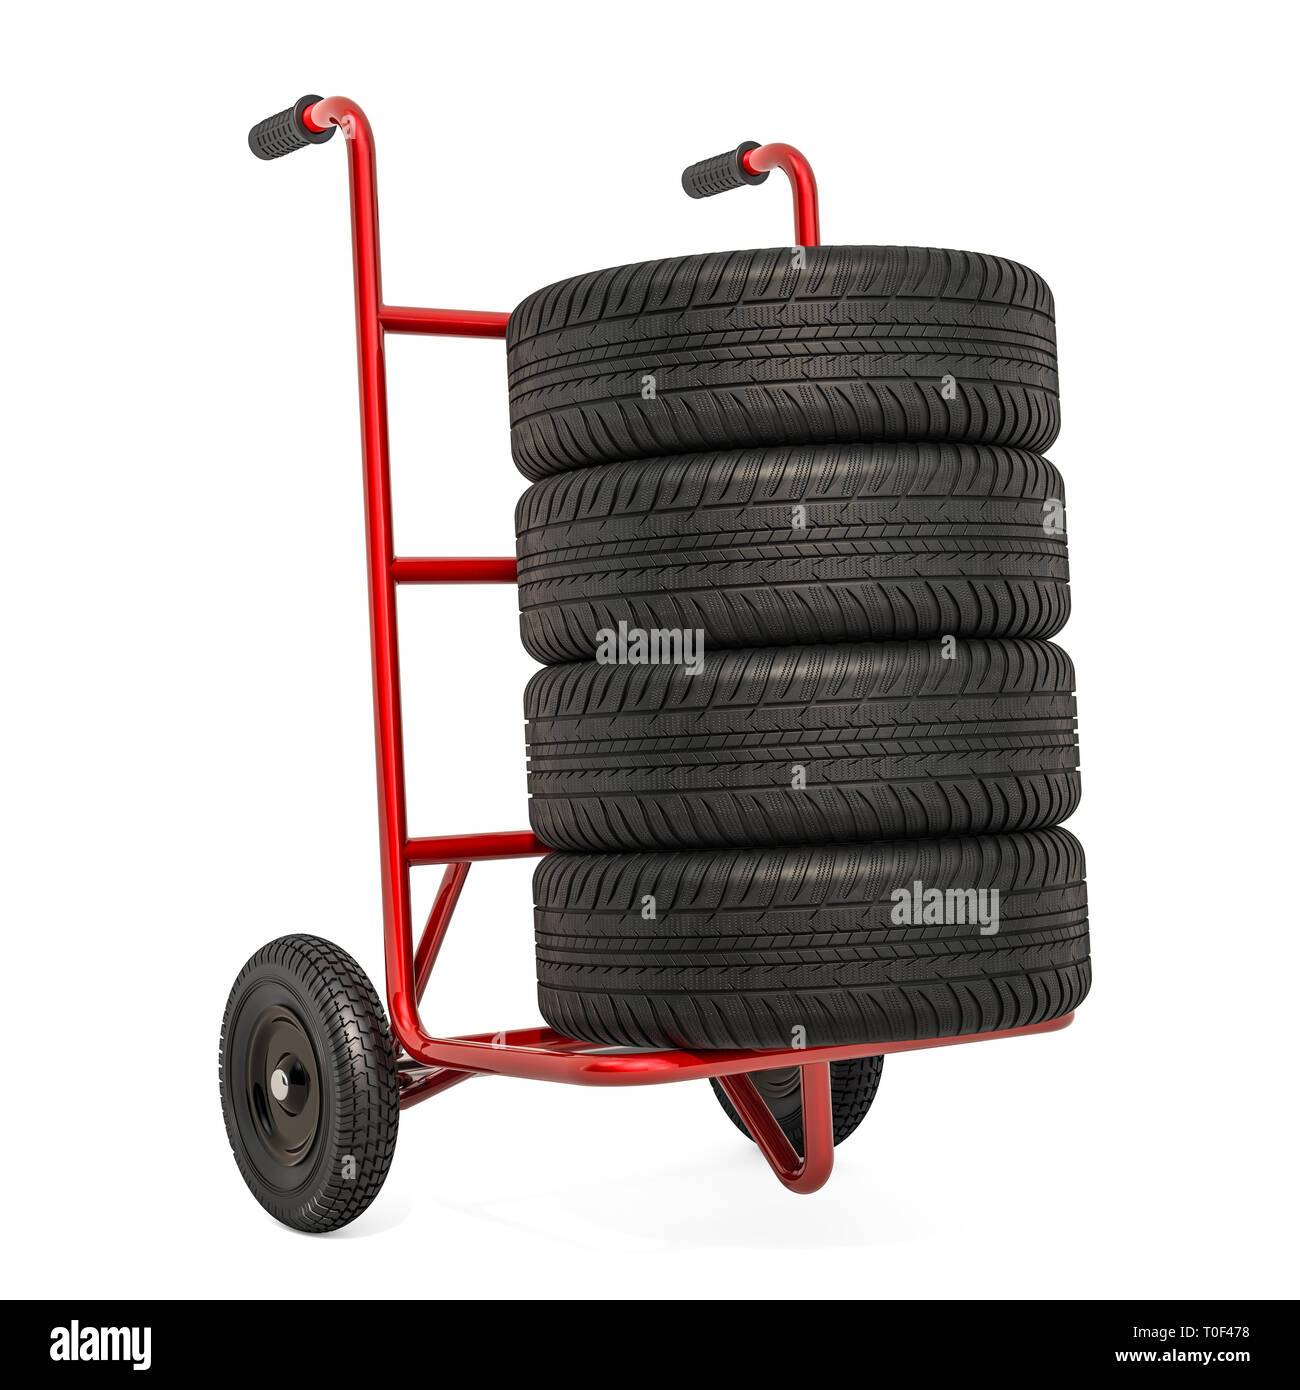 Hand truck with car tires. 3D rendering isolated on white background Stock Photo